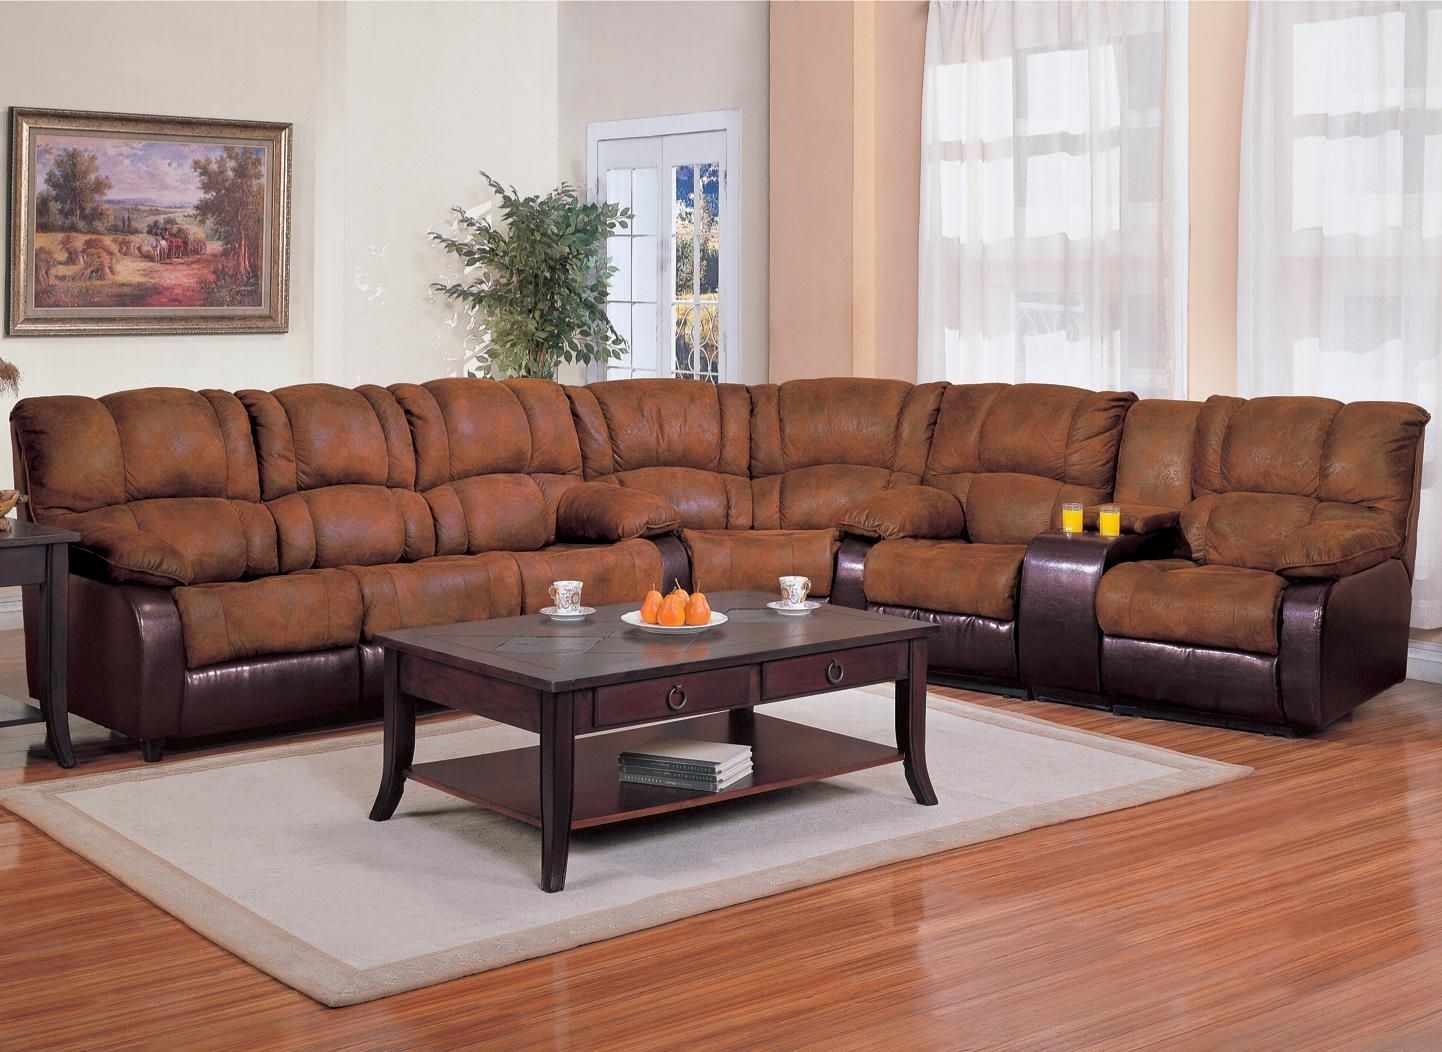 Featured Photo of 10 Best Guelph Sectional Sofas